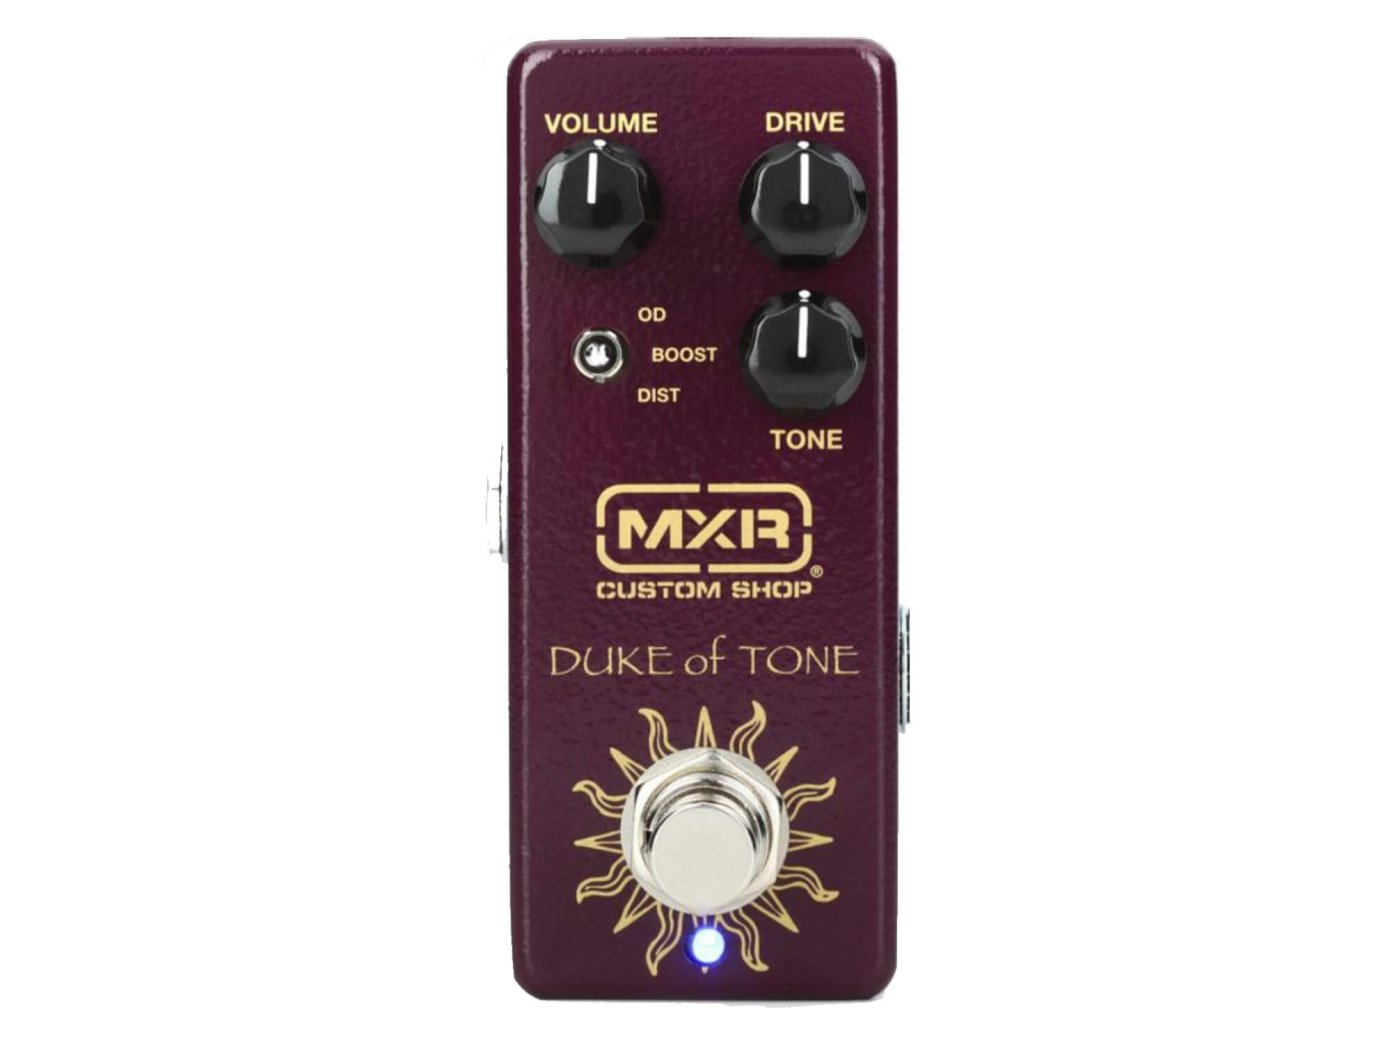 MXR Duke Of Tone: Are MXR and Analog Man teaming up on an affordable